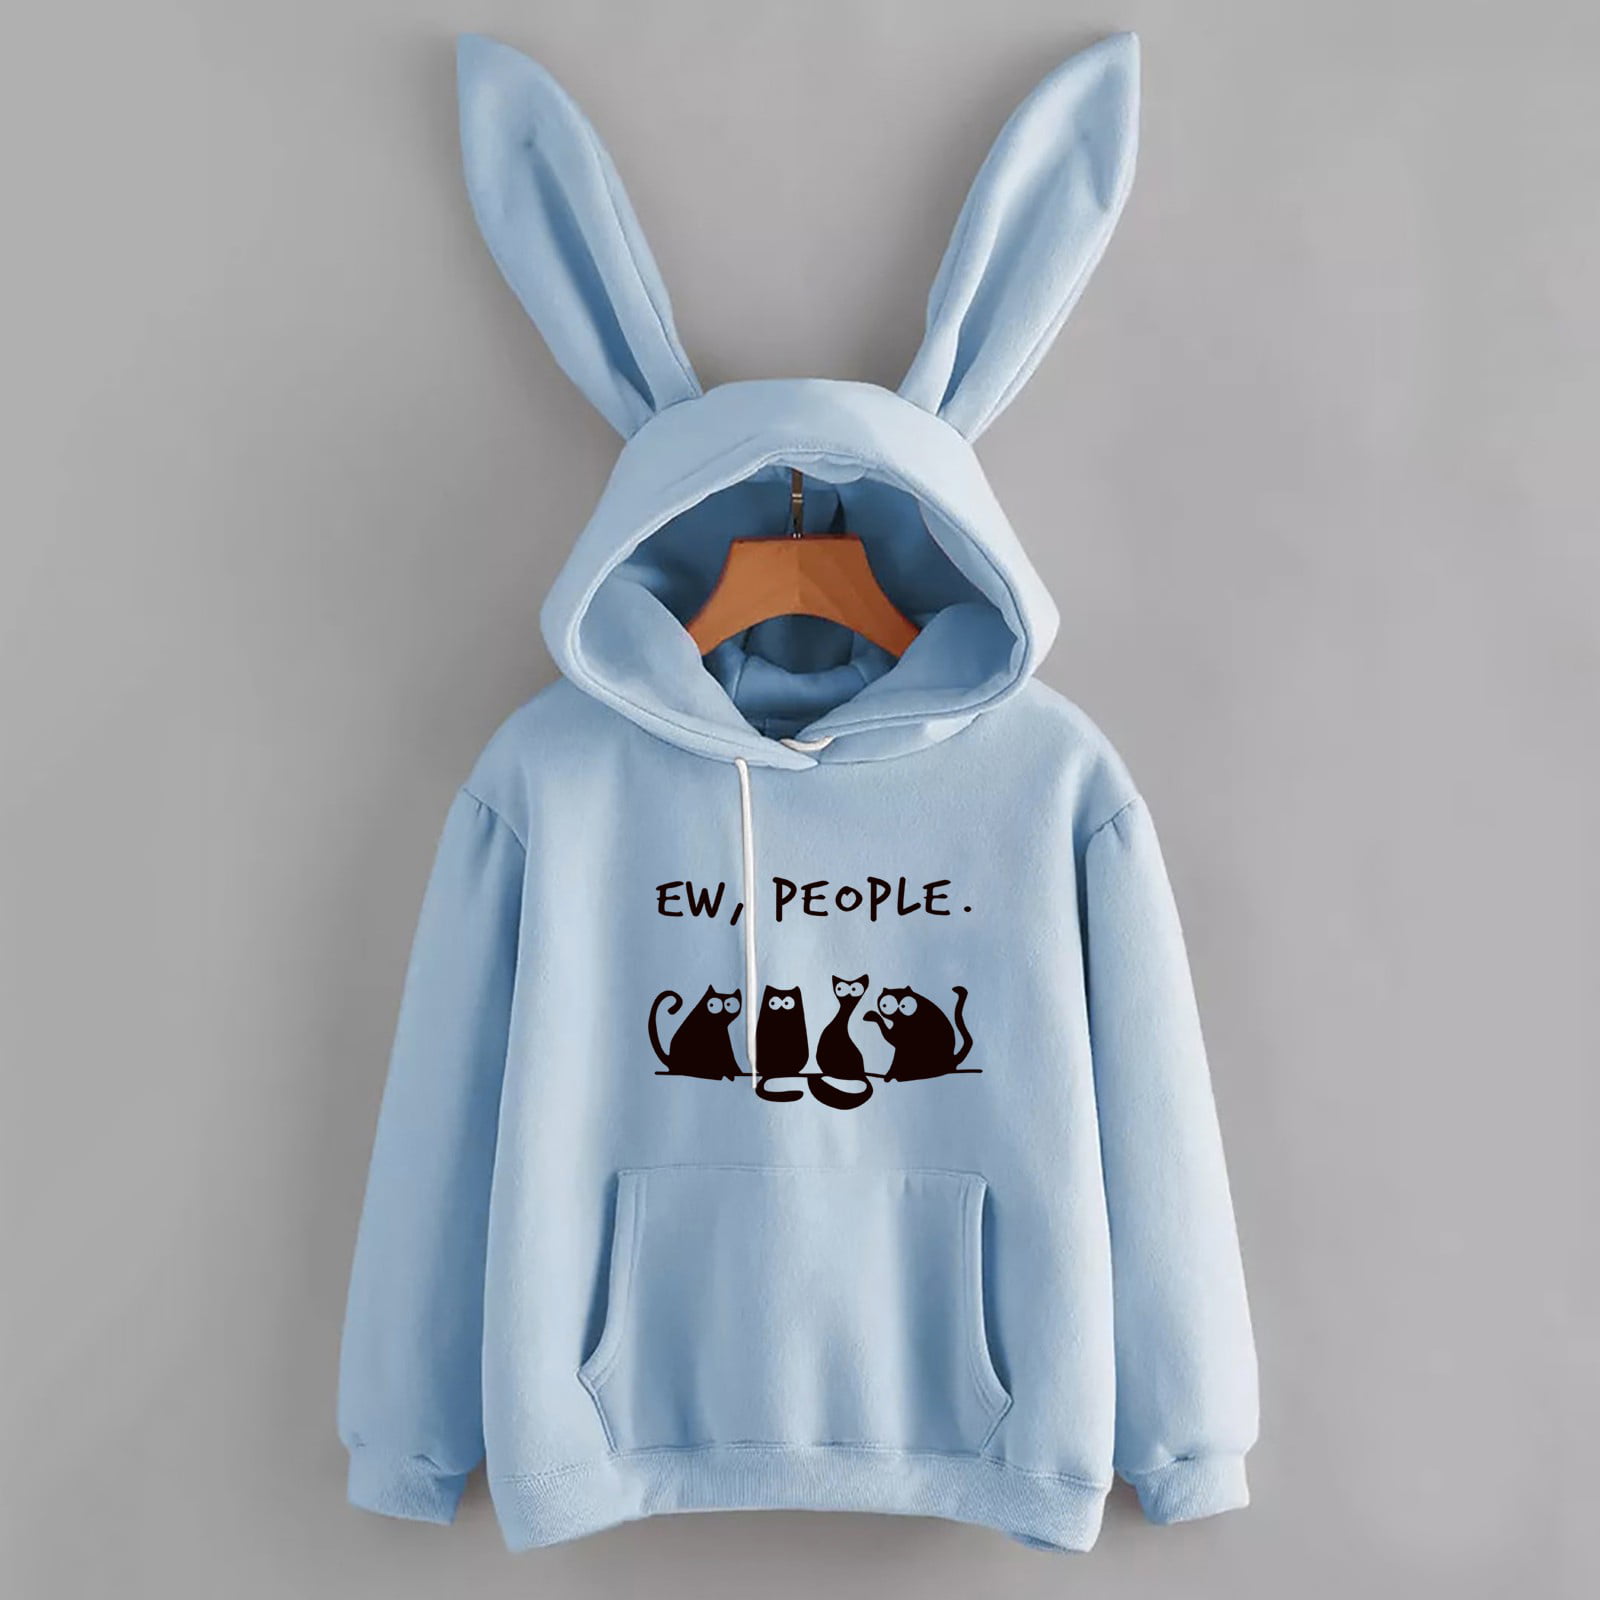 Funny Sweatshirts for Women Cute Rabbit Graphic Hoodies Casual FashionTops Have Ear And Pockets M, Blue 